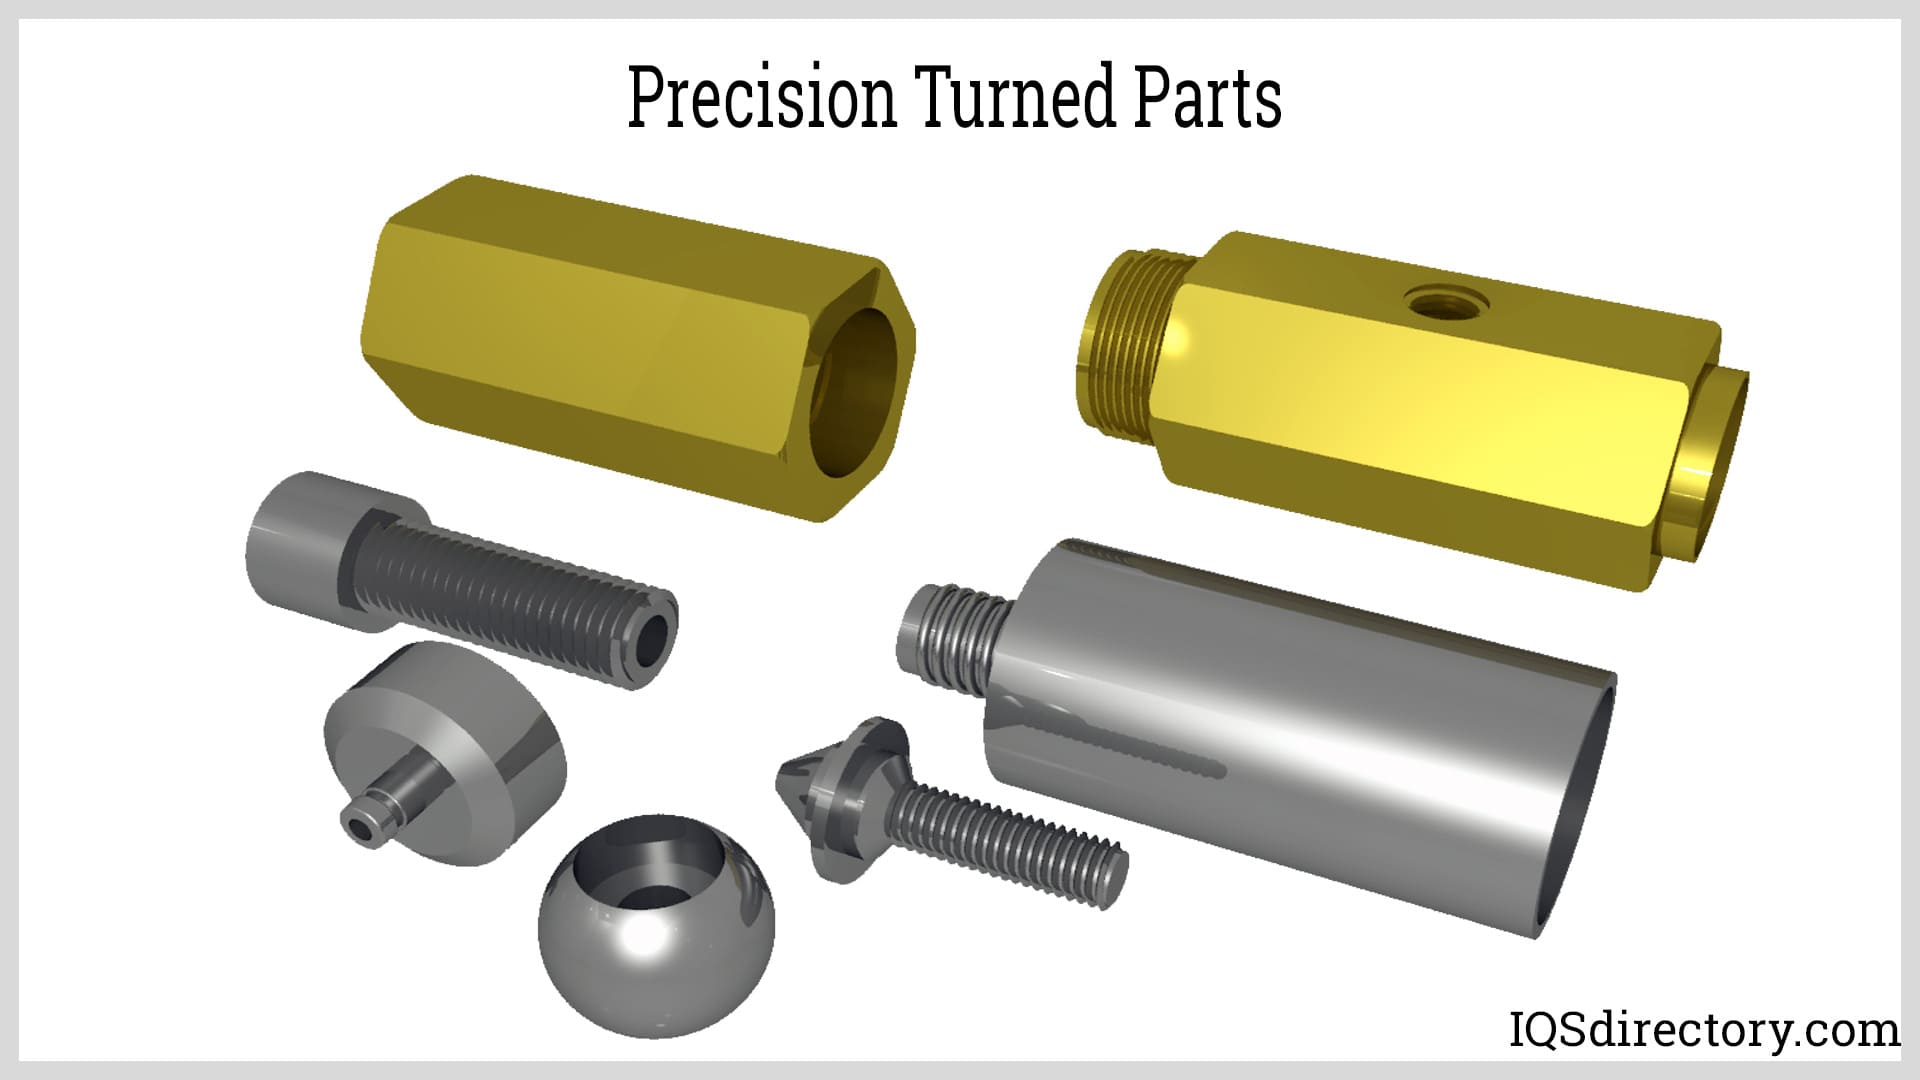 Precision Turned Parts